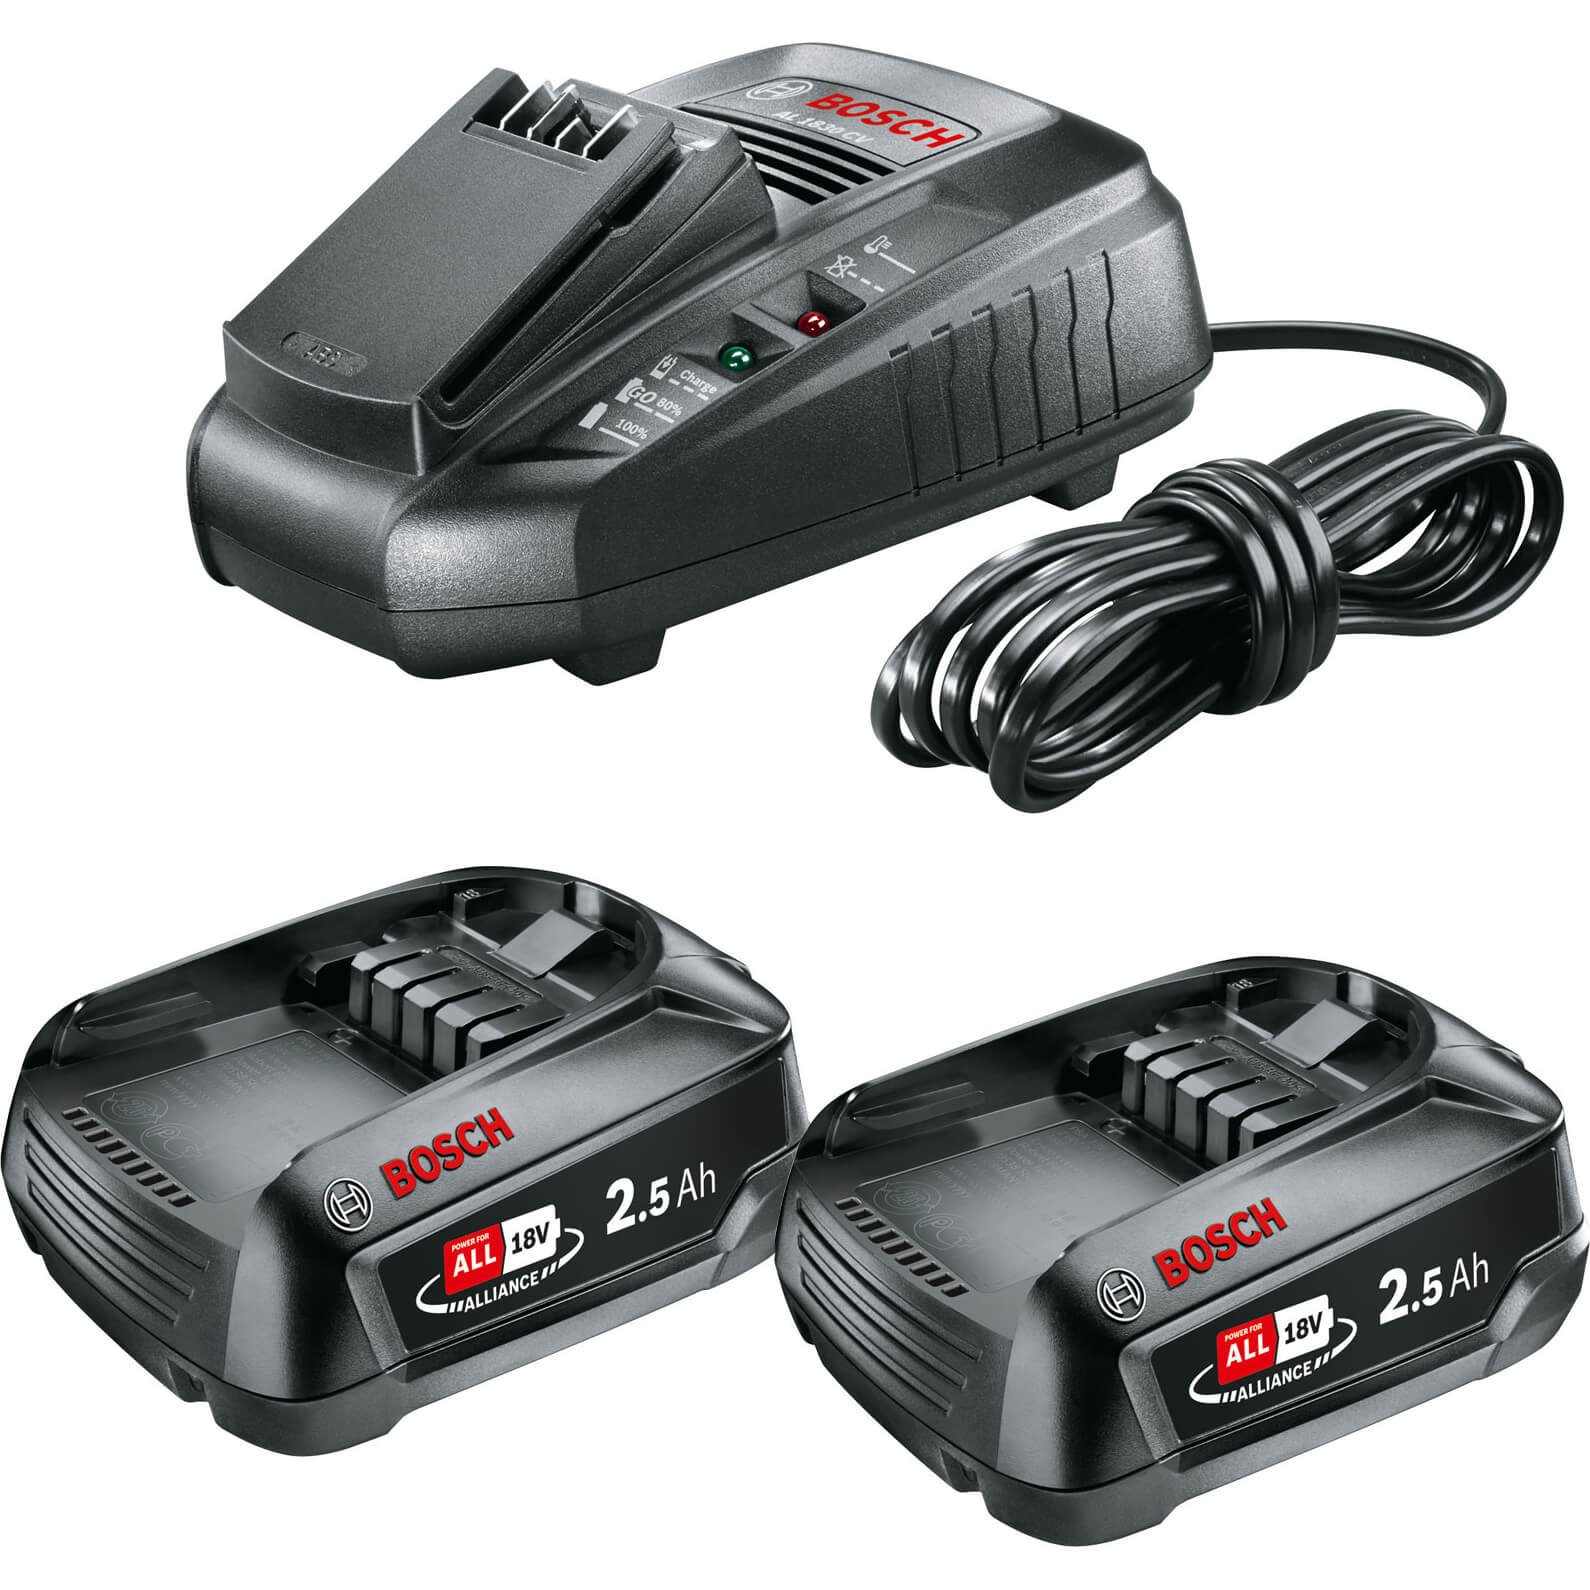 Photo of Bosch Genuine Power4all 18v Cordless Li-ion Twin Battery 2.5ah And 3a Fast Charger Set 2.5ah